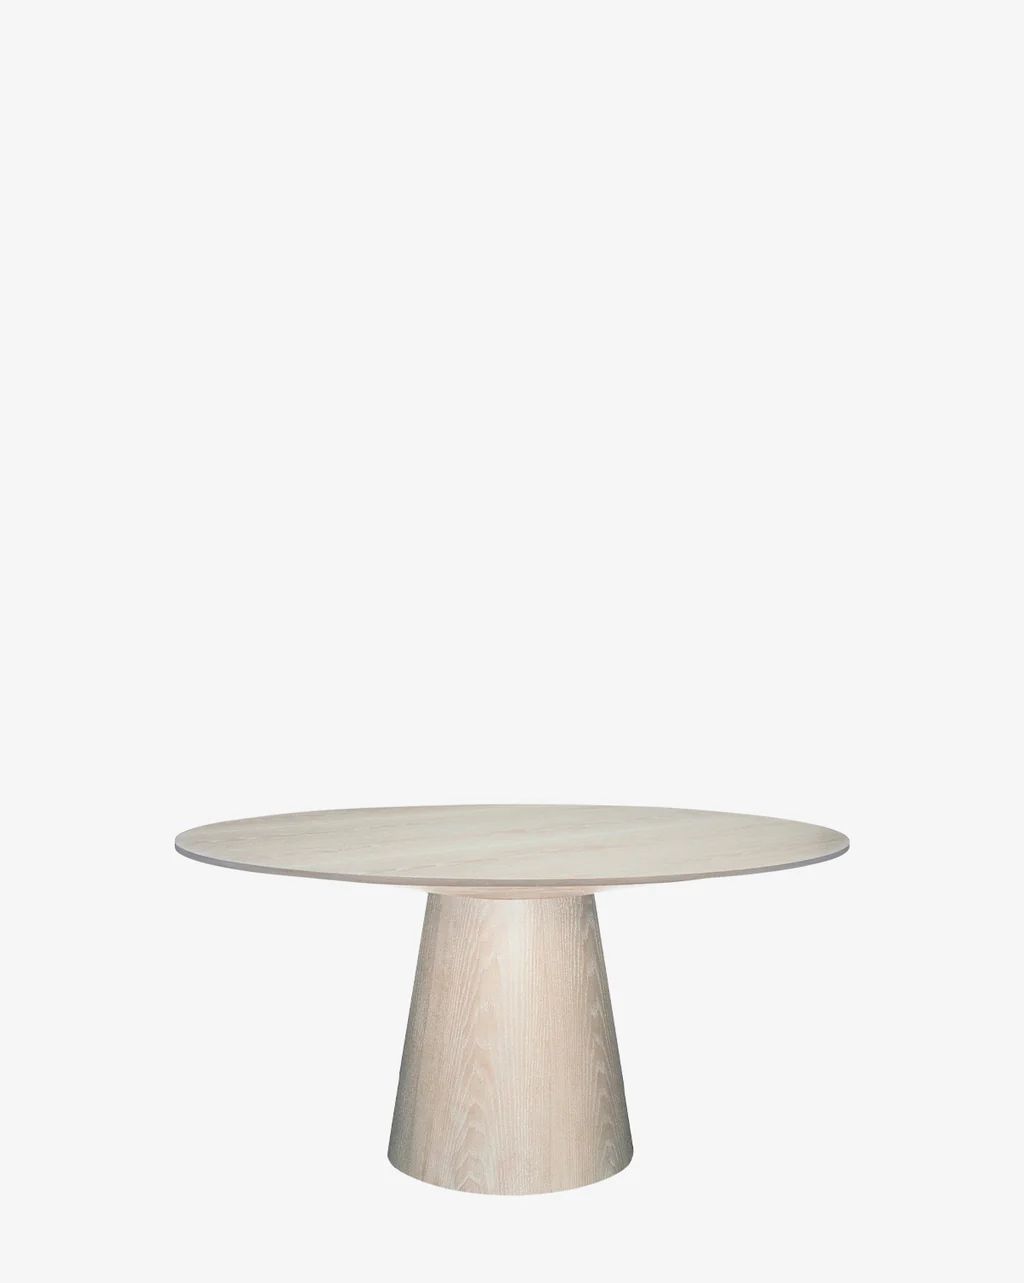 Preston Round Dining Table | McGee & Co.